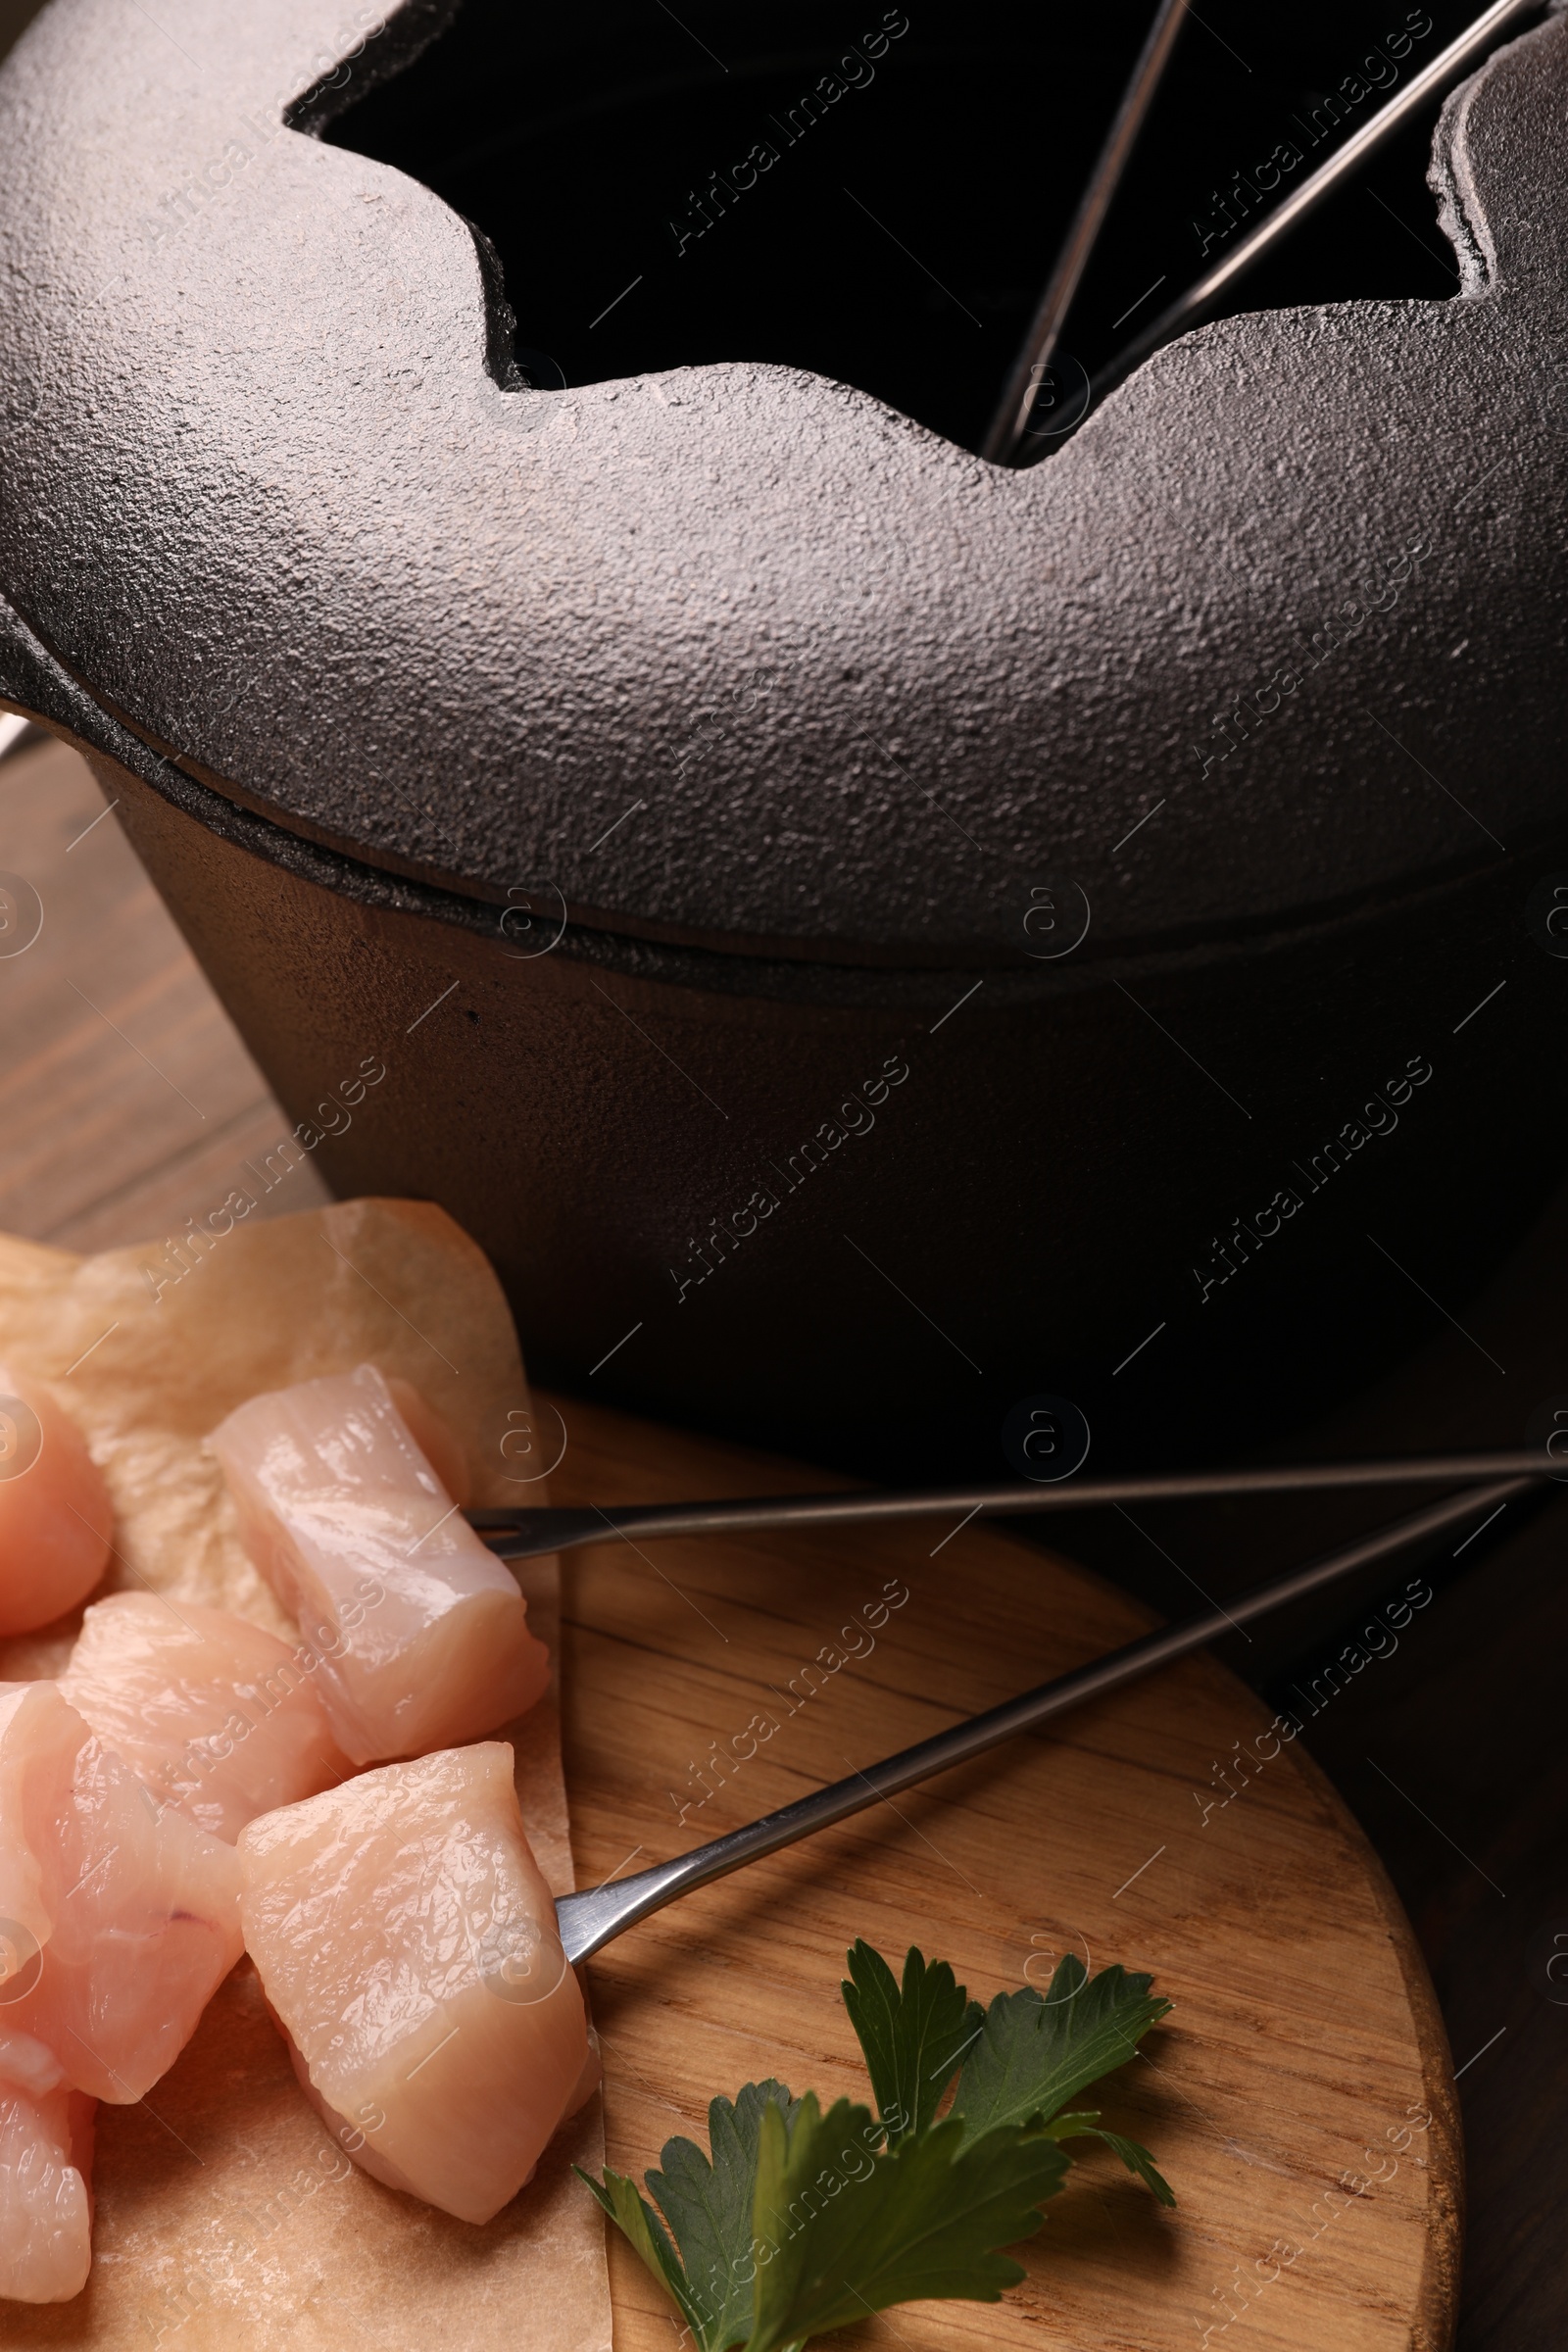 Photo of Fondue pot with oil, forks, raw meat pieces and parsley on wooden table, closeup